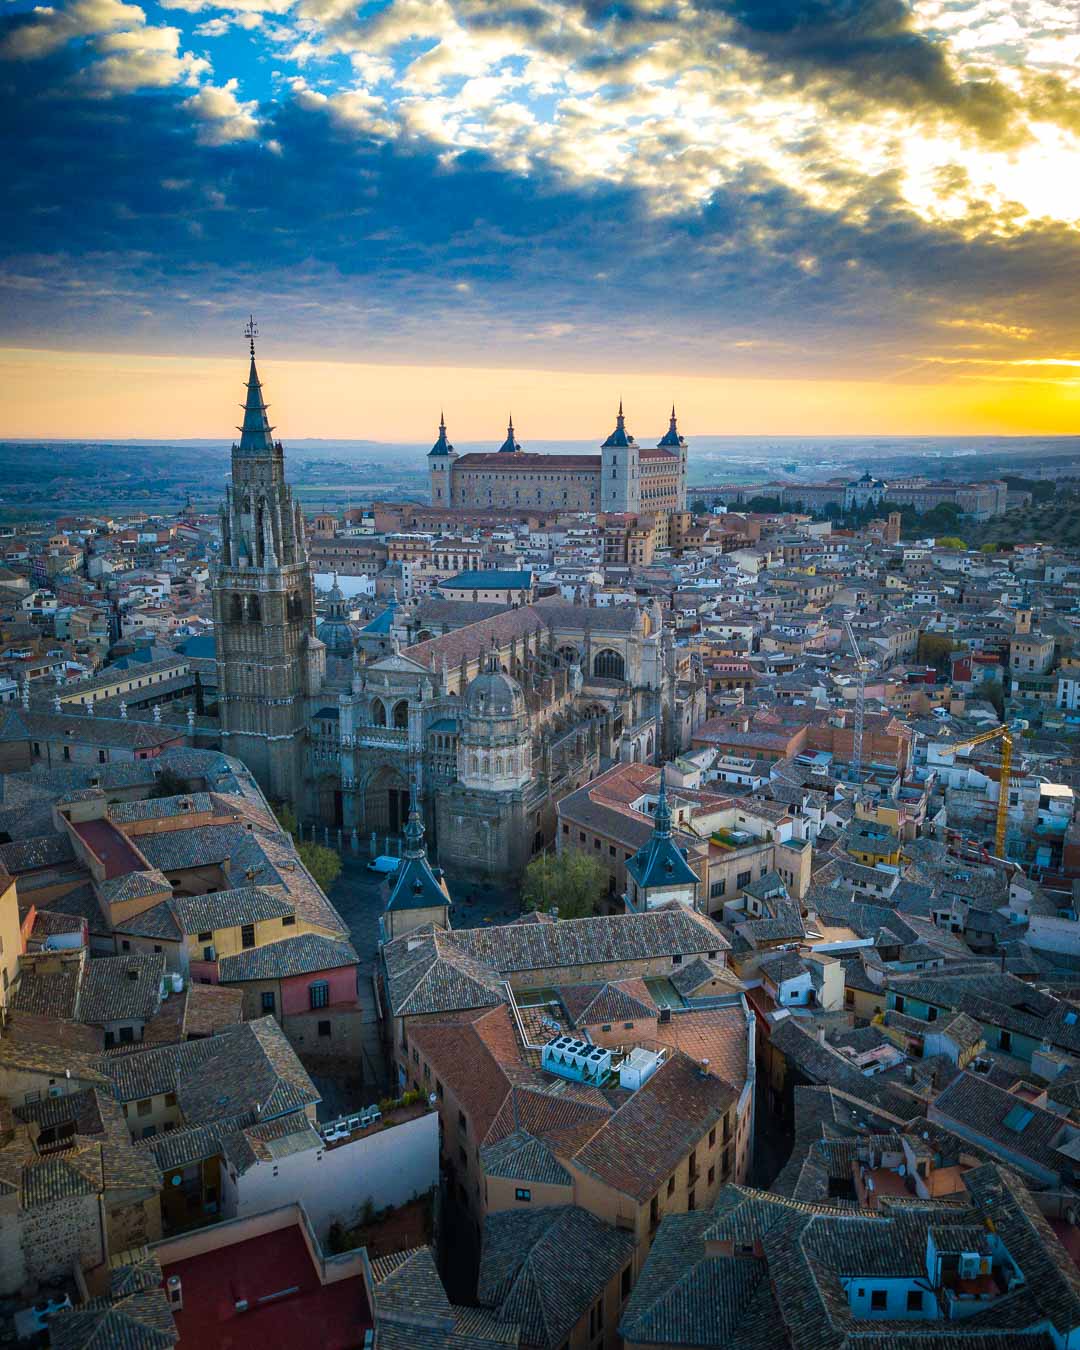 catedral and alcazar de toledo from above, two answers to what to see in toledo spain